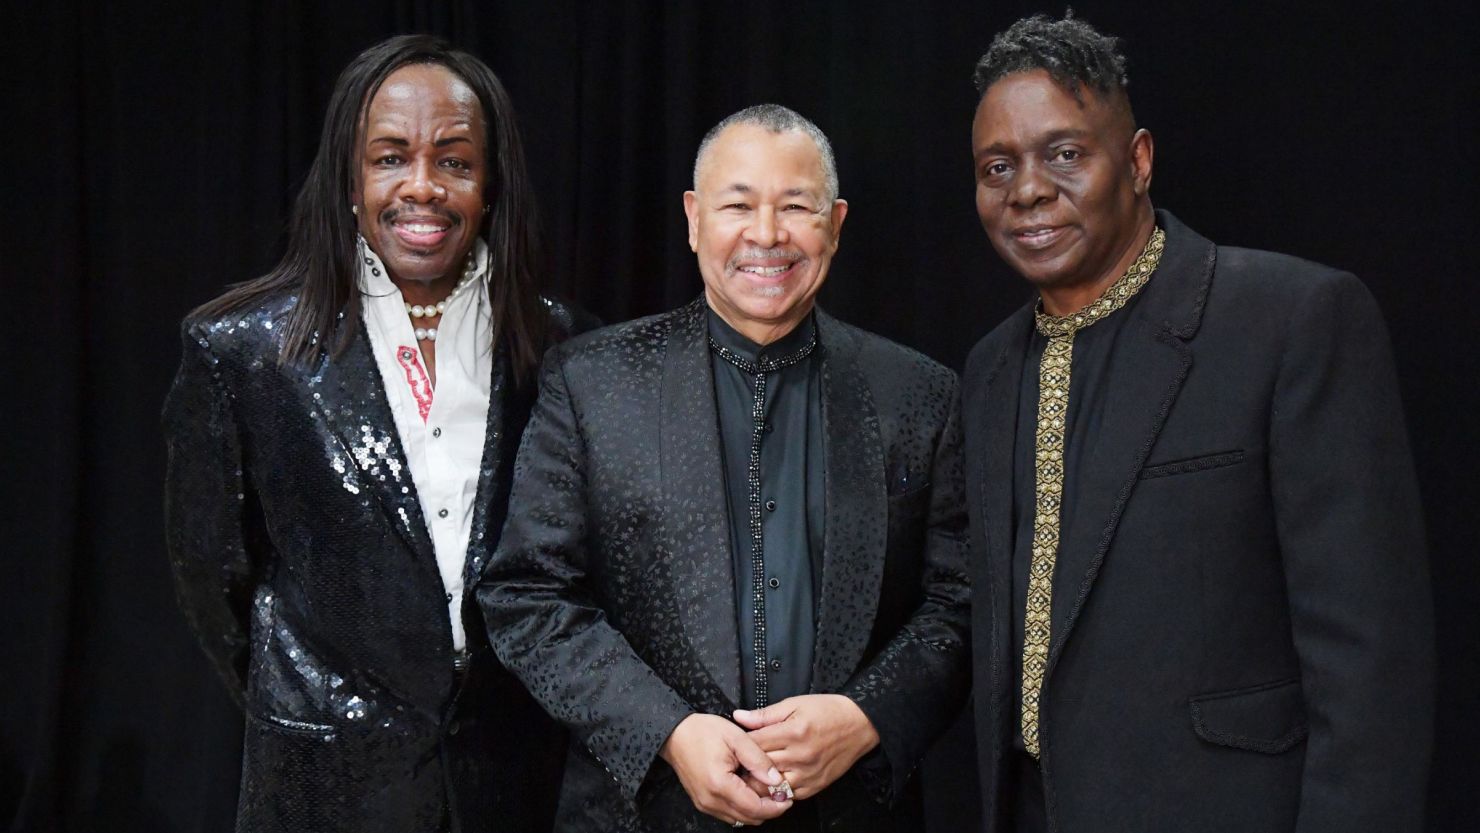 Verdine White, Ralph Johnson and Philip Bailey of Earth, Wind & Fire attend the 62nd Annual Grammy Awards on January 28, 2020.